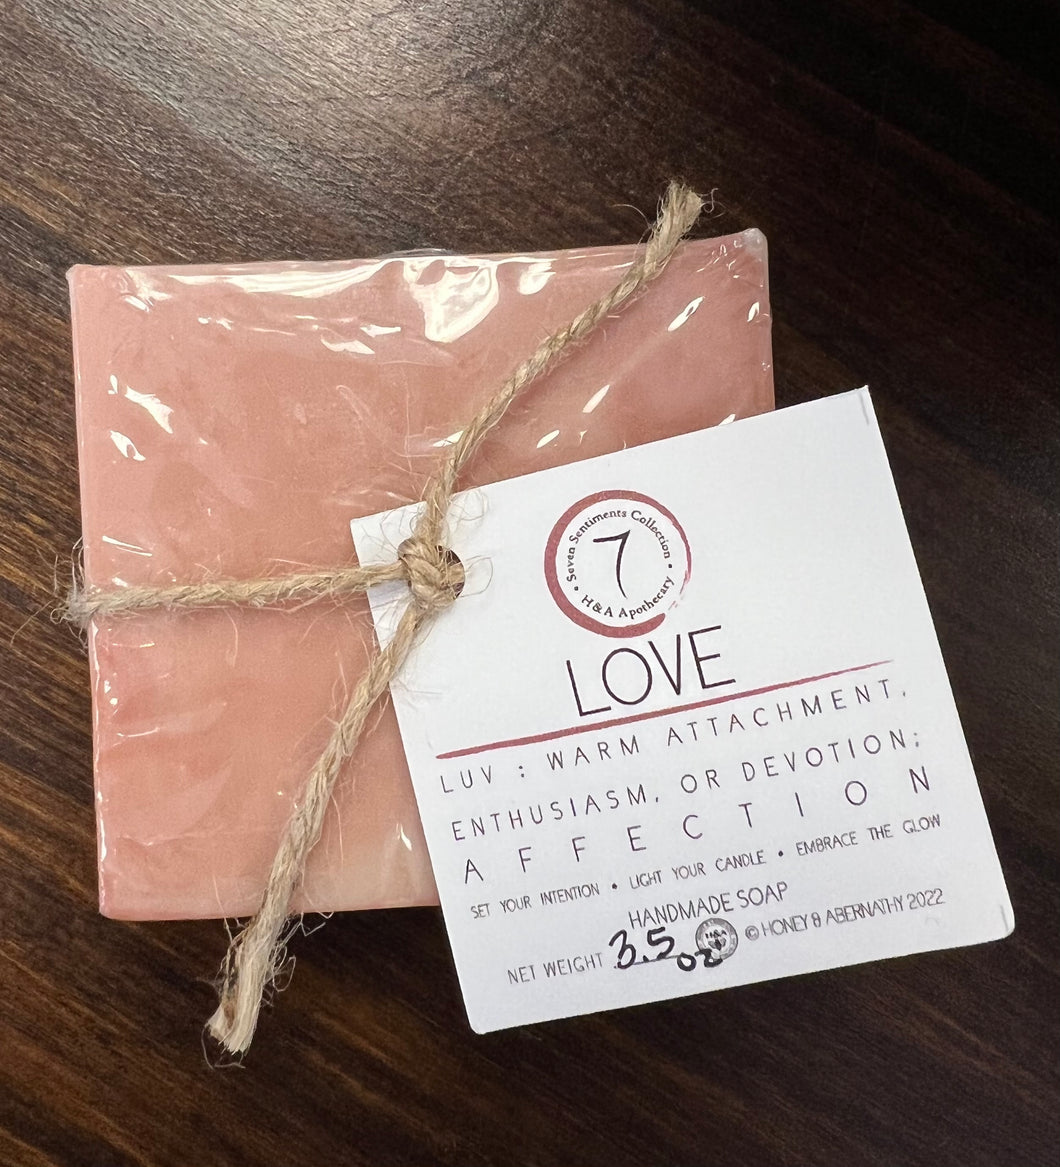 H&A Apothecary Seven Sentiments Collection - Love Soap